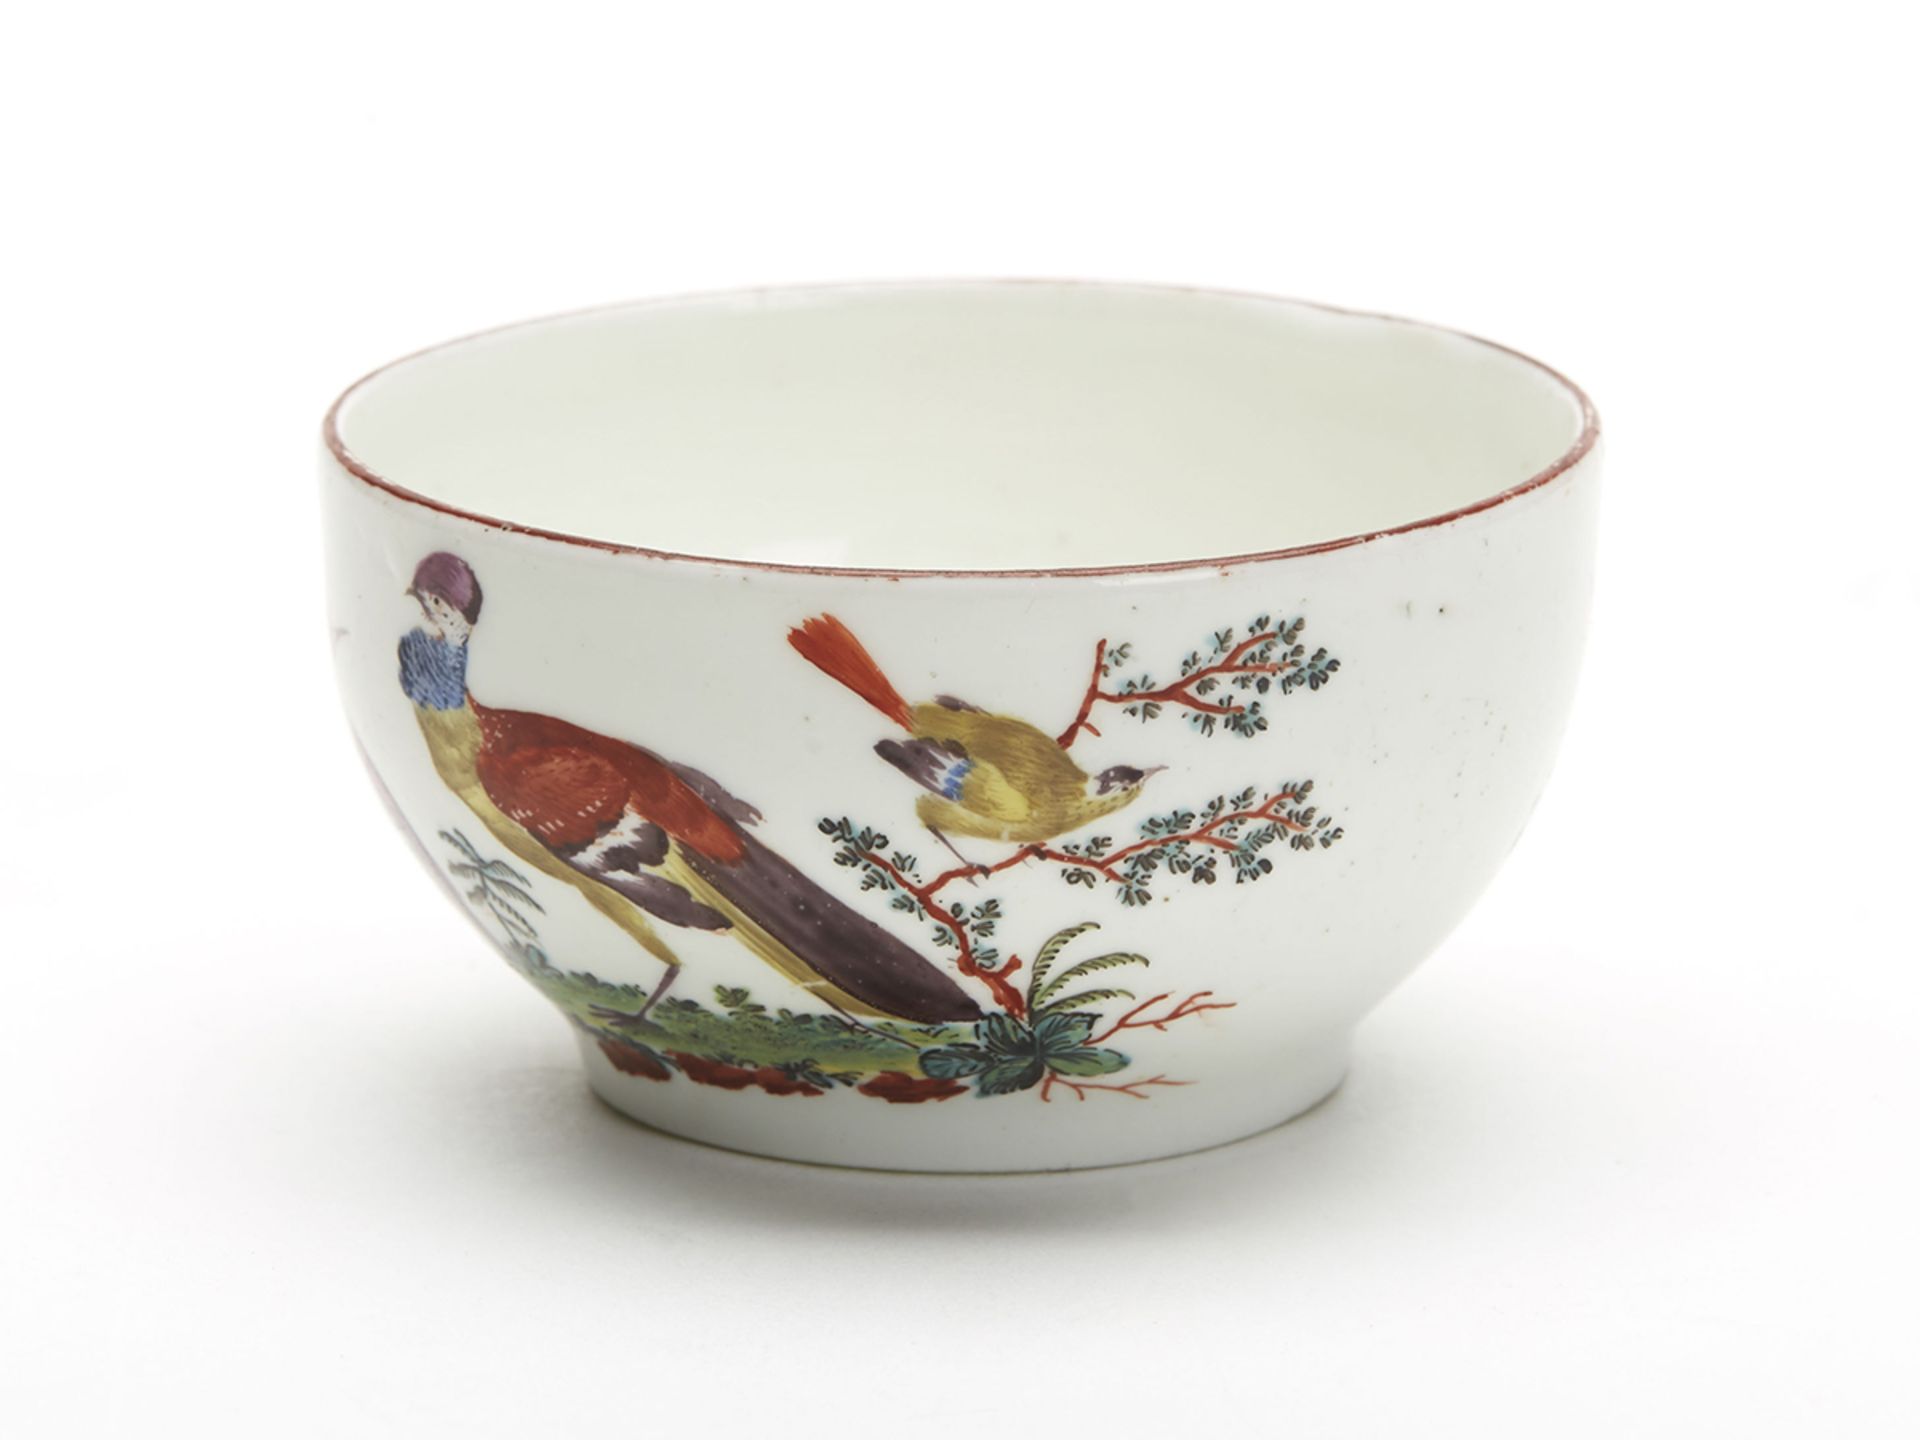 ANTIQUE EARLY CHELSEA BIRD PAINTED TEABOWL 18TH C. - Image 2 of 7